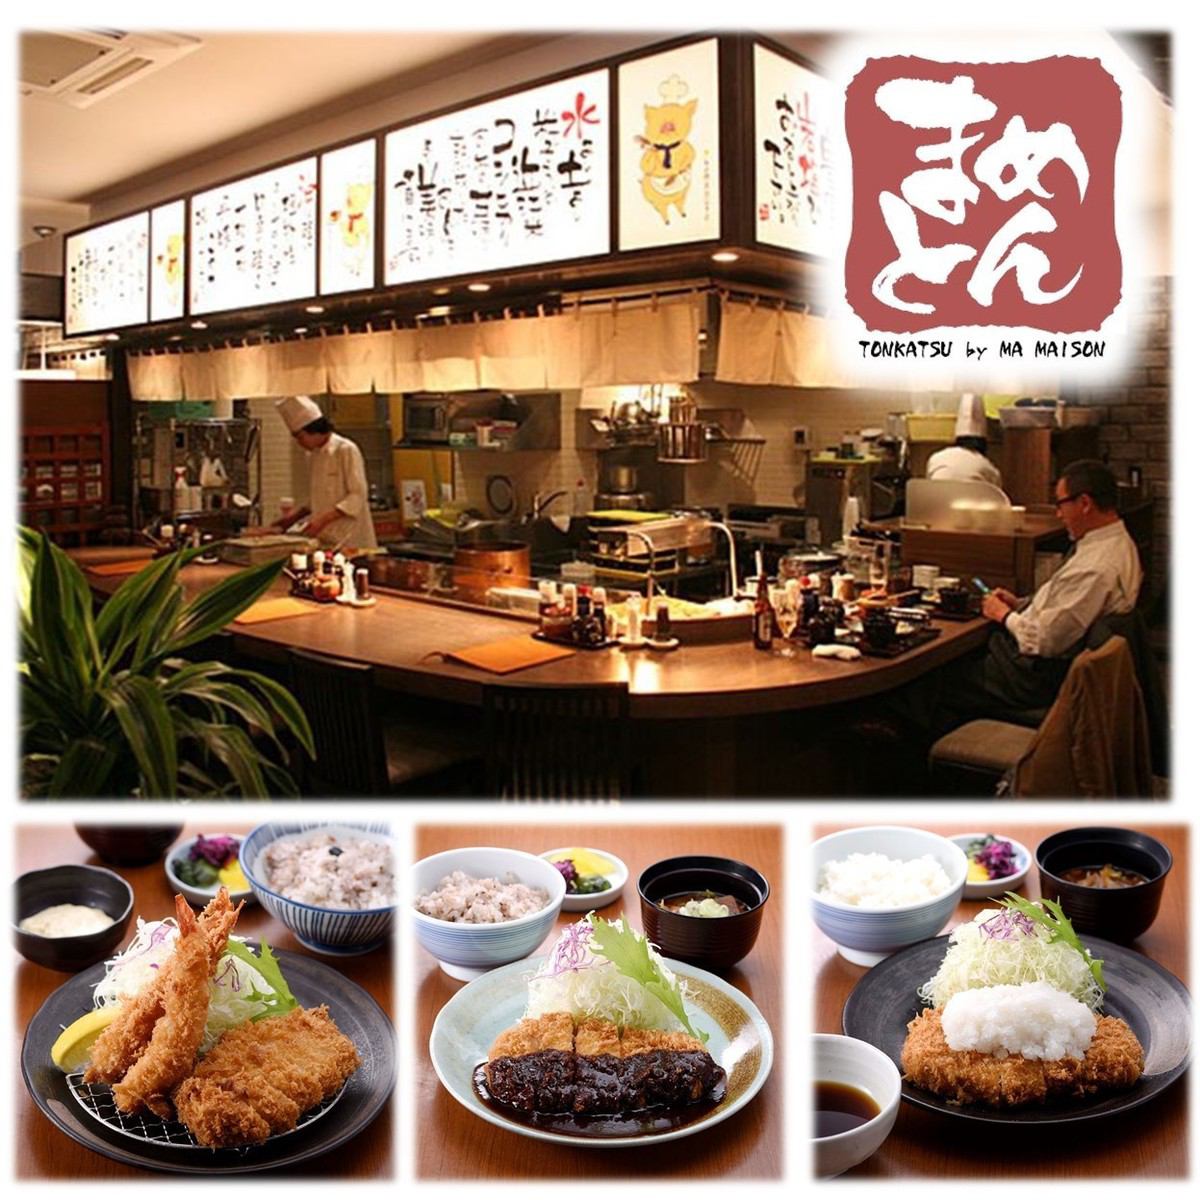 A restaurant that boasts the exquisite pork cutlet produced by the old Nagoya restaurant, Ma Maison.